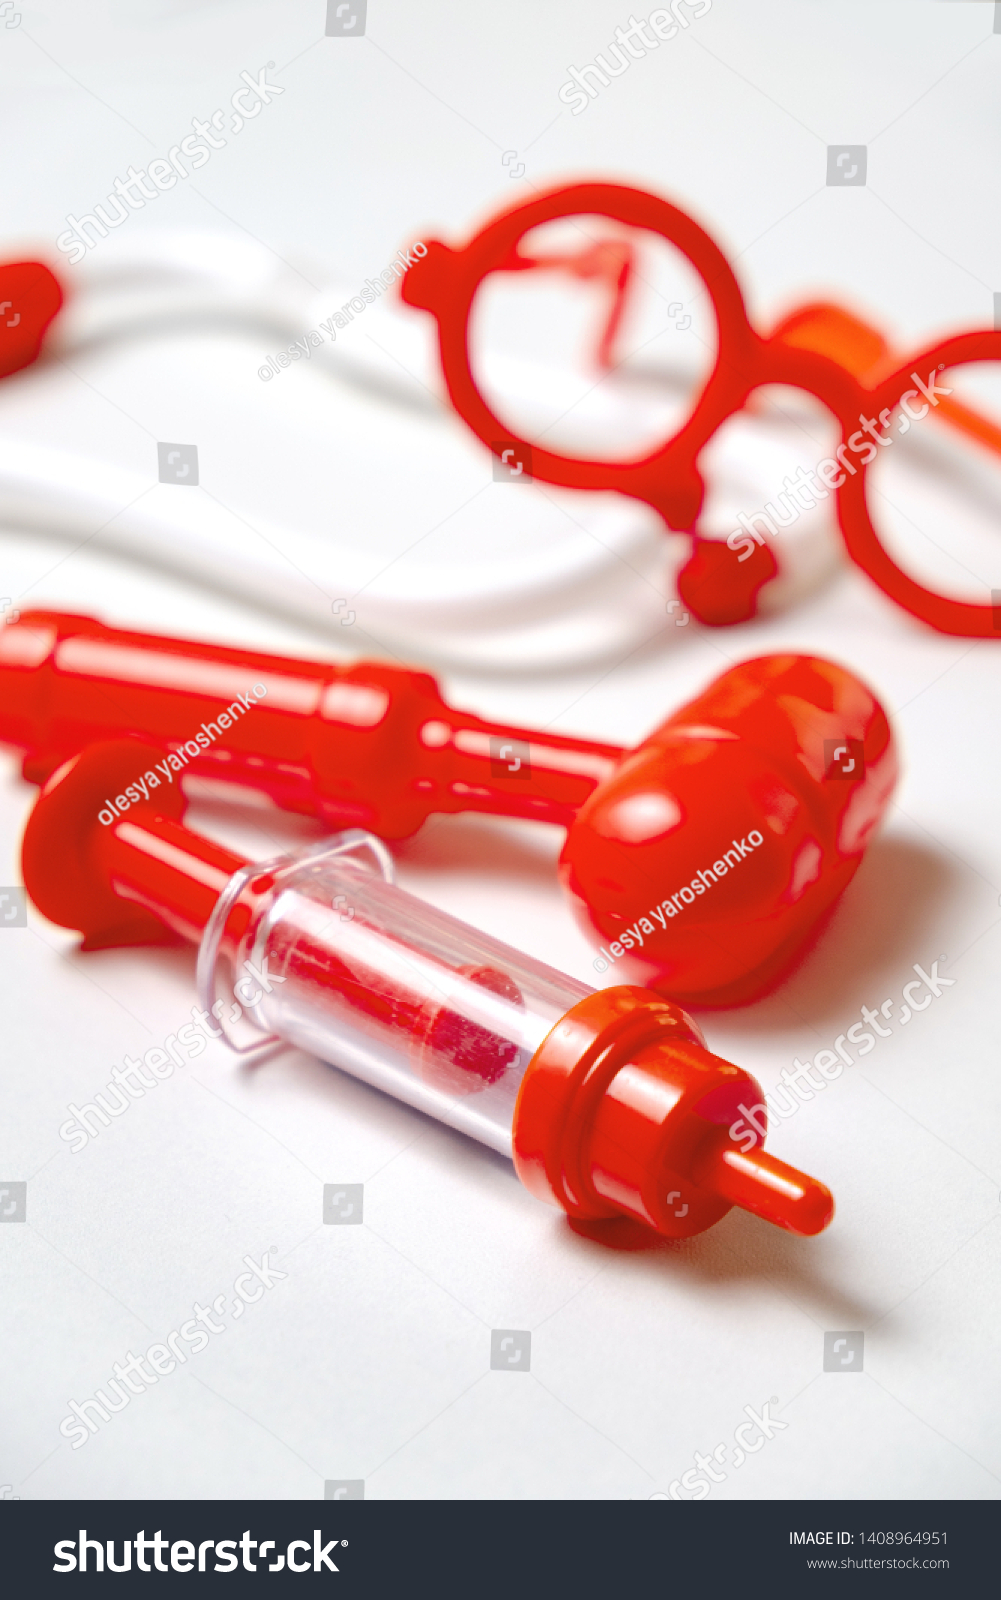 Toy medical devices on a white background.  Kids playing profession doctor. Choice of profession #1408964951